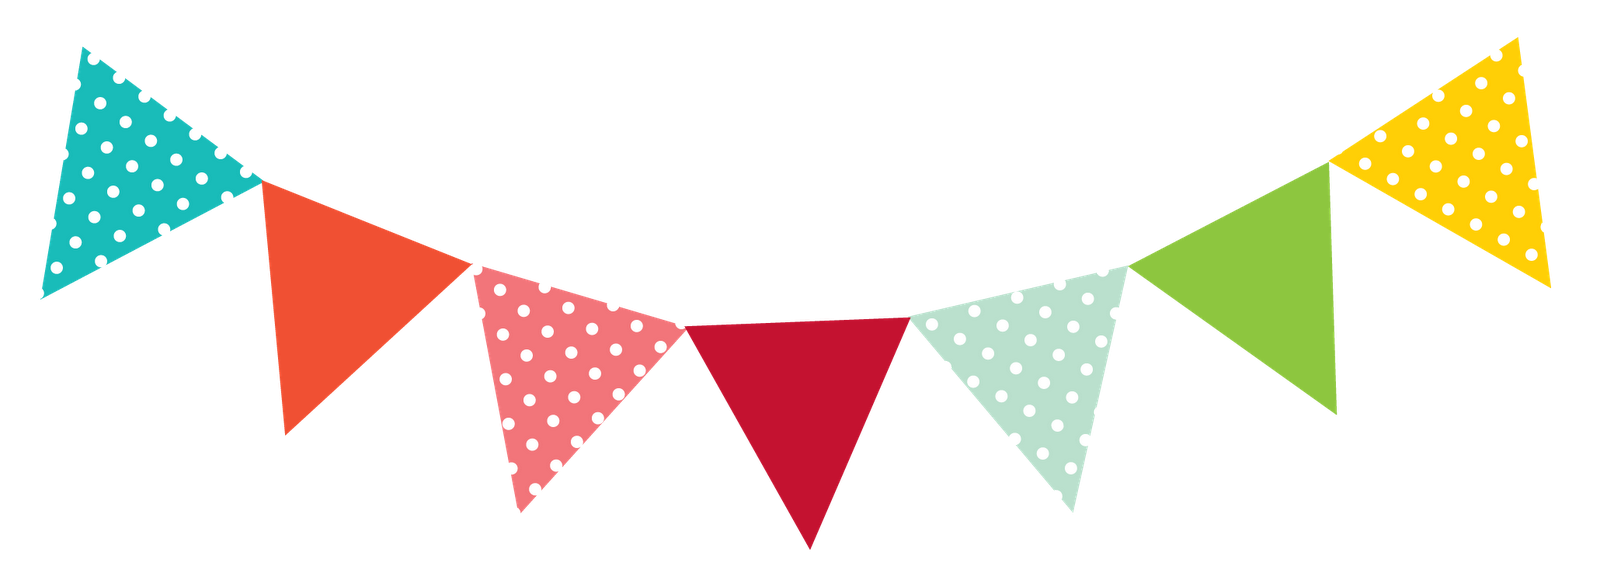 free clip art bunting flags - photo #3